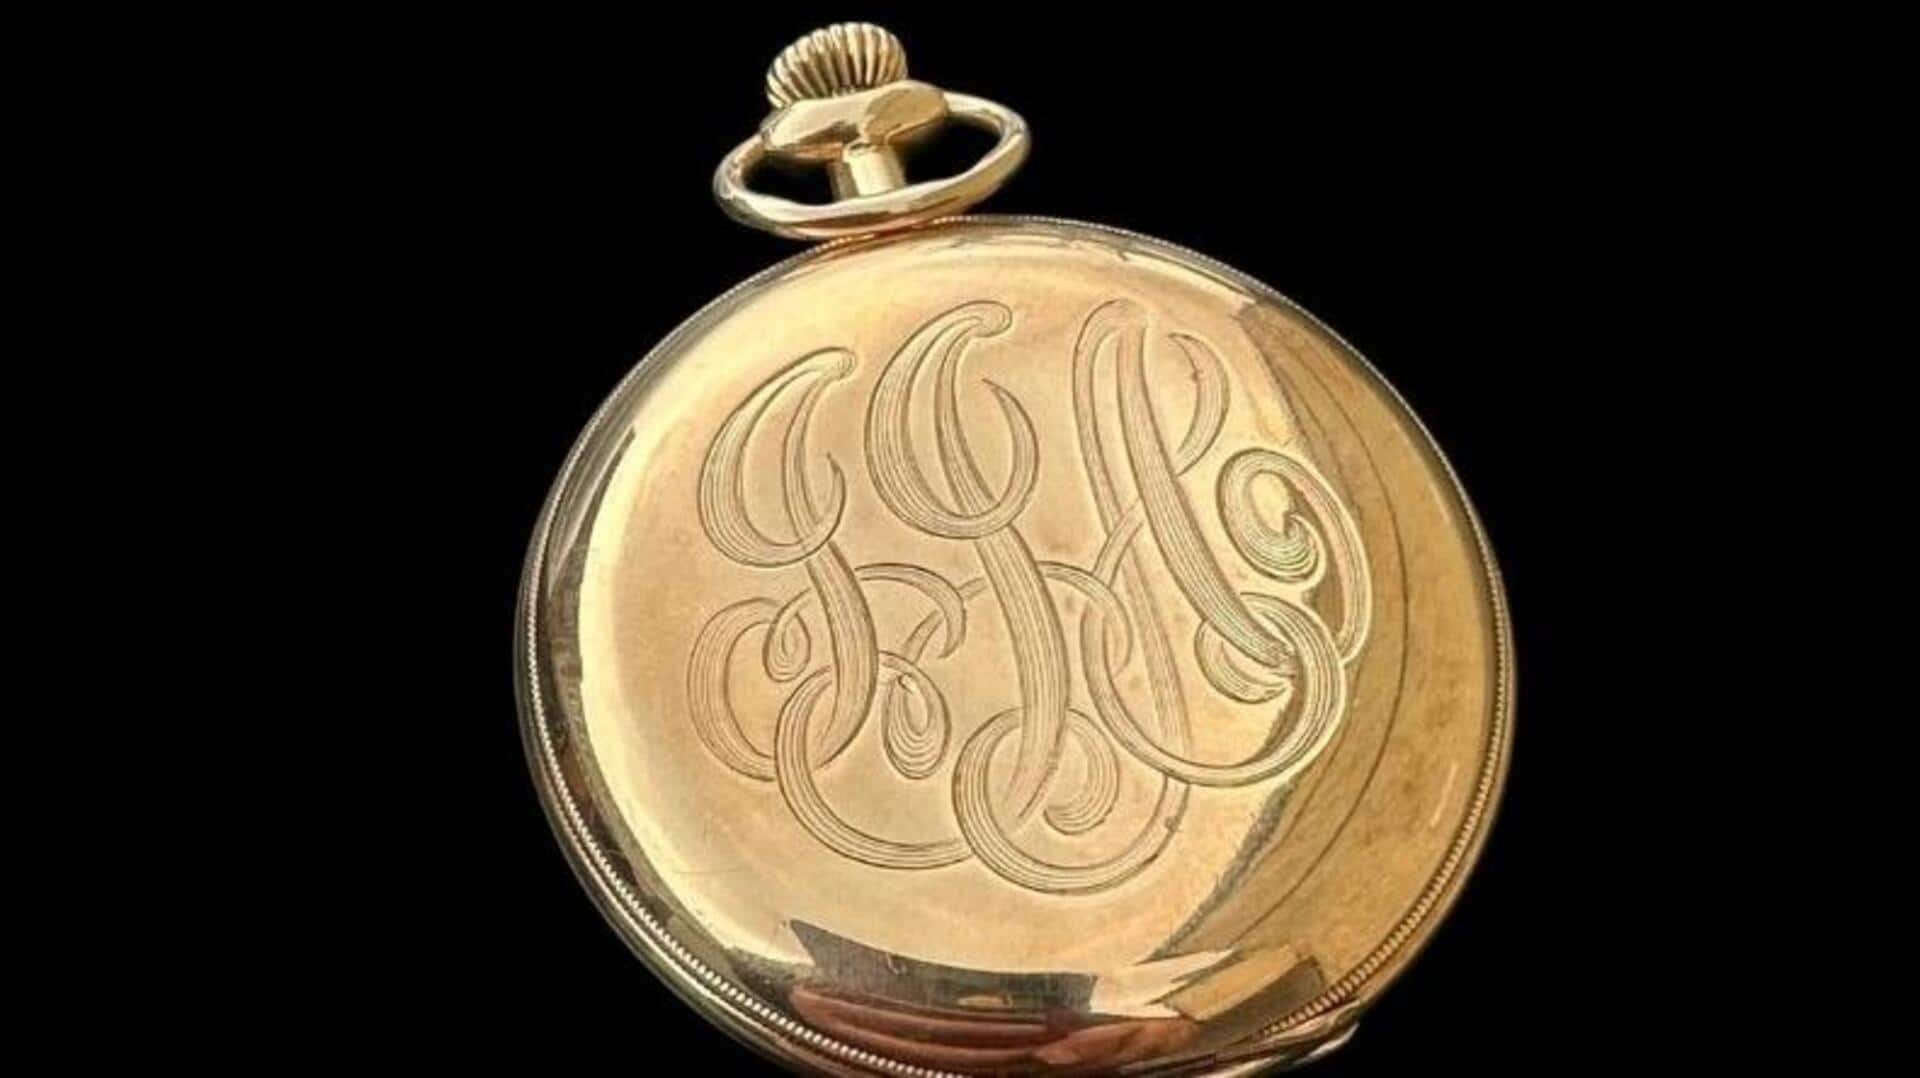 Gold pocket watch of Titanic's wealthiest passenger sold for $1.2M